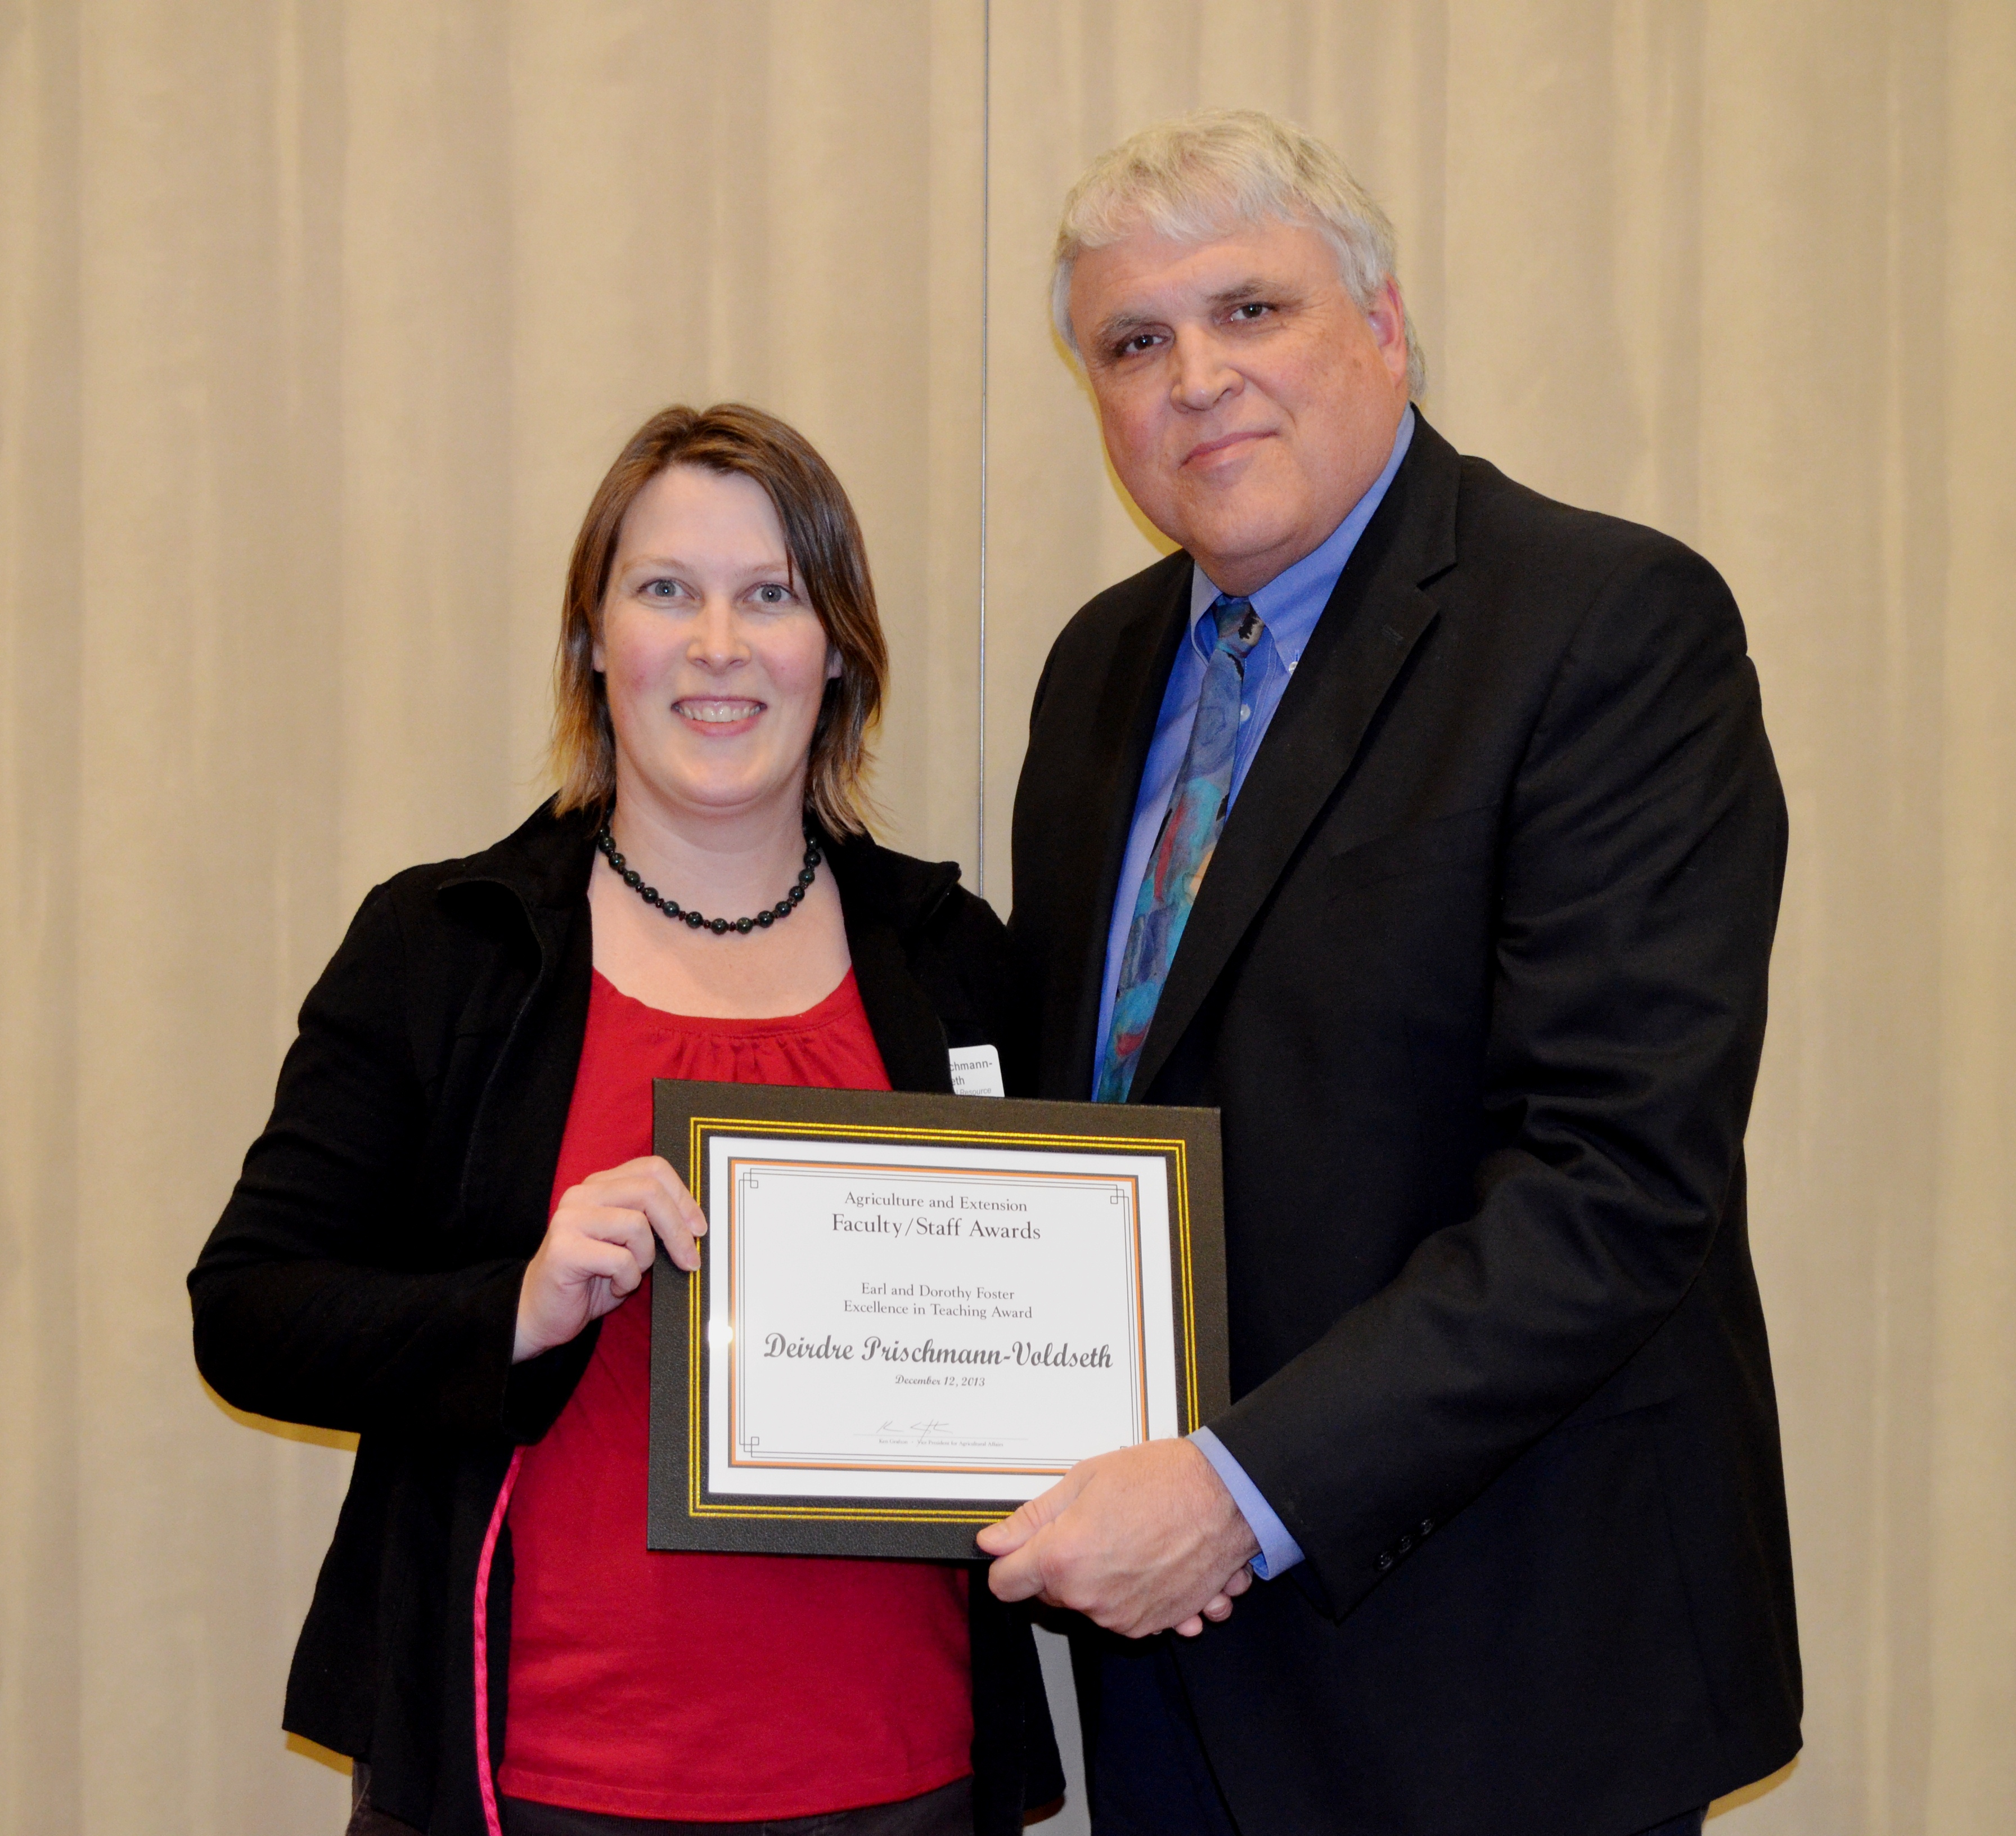 Deirdre Prischmann-Voldseth, assistant professor, School of Natural Resource Sciences (Entomology Department) receives the Earl and Dorothy Foster Excellence in Teaching Award from David Buchanan, associate dean for academic programs in the College of Agriculture, Food Systems, and Natural Resources.